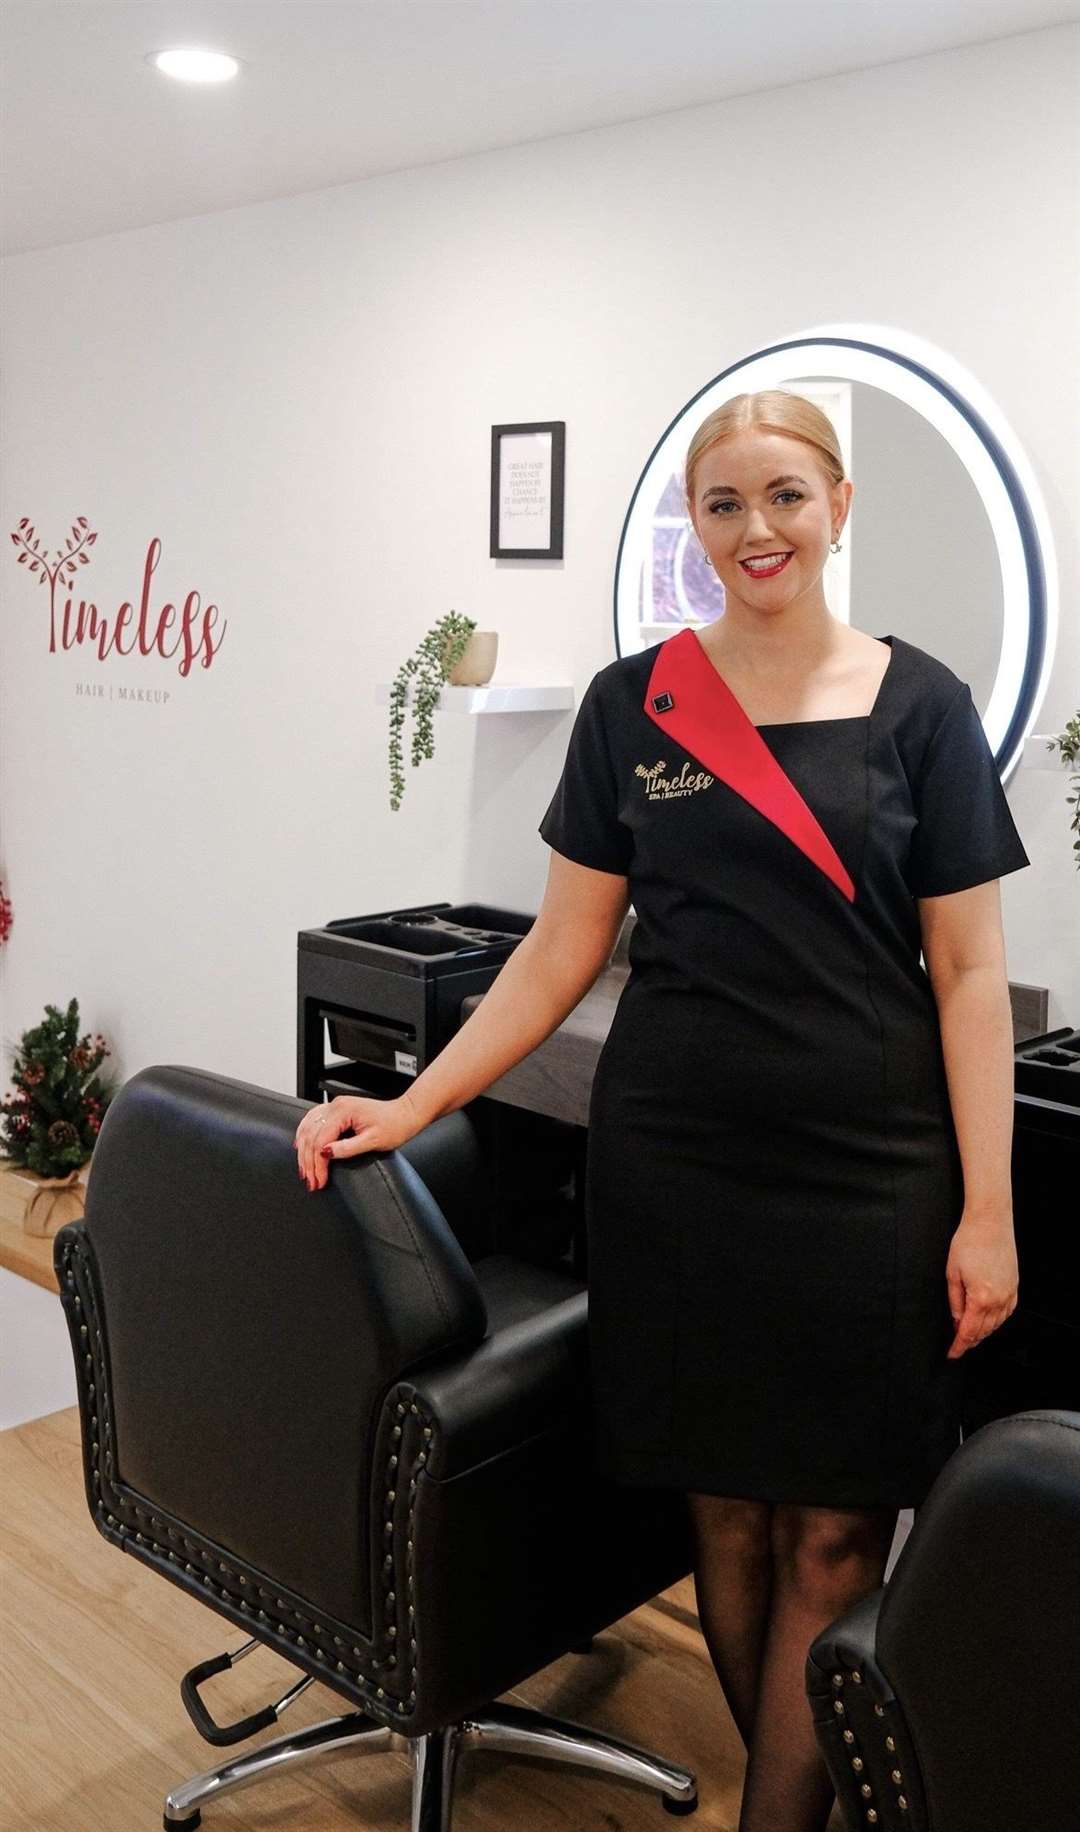 Caoimhe from Timeless salon will give mums some much-deserved pampering.